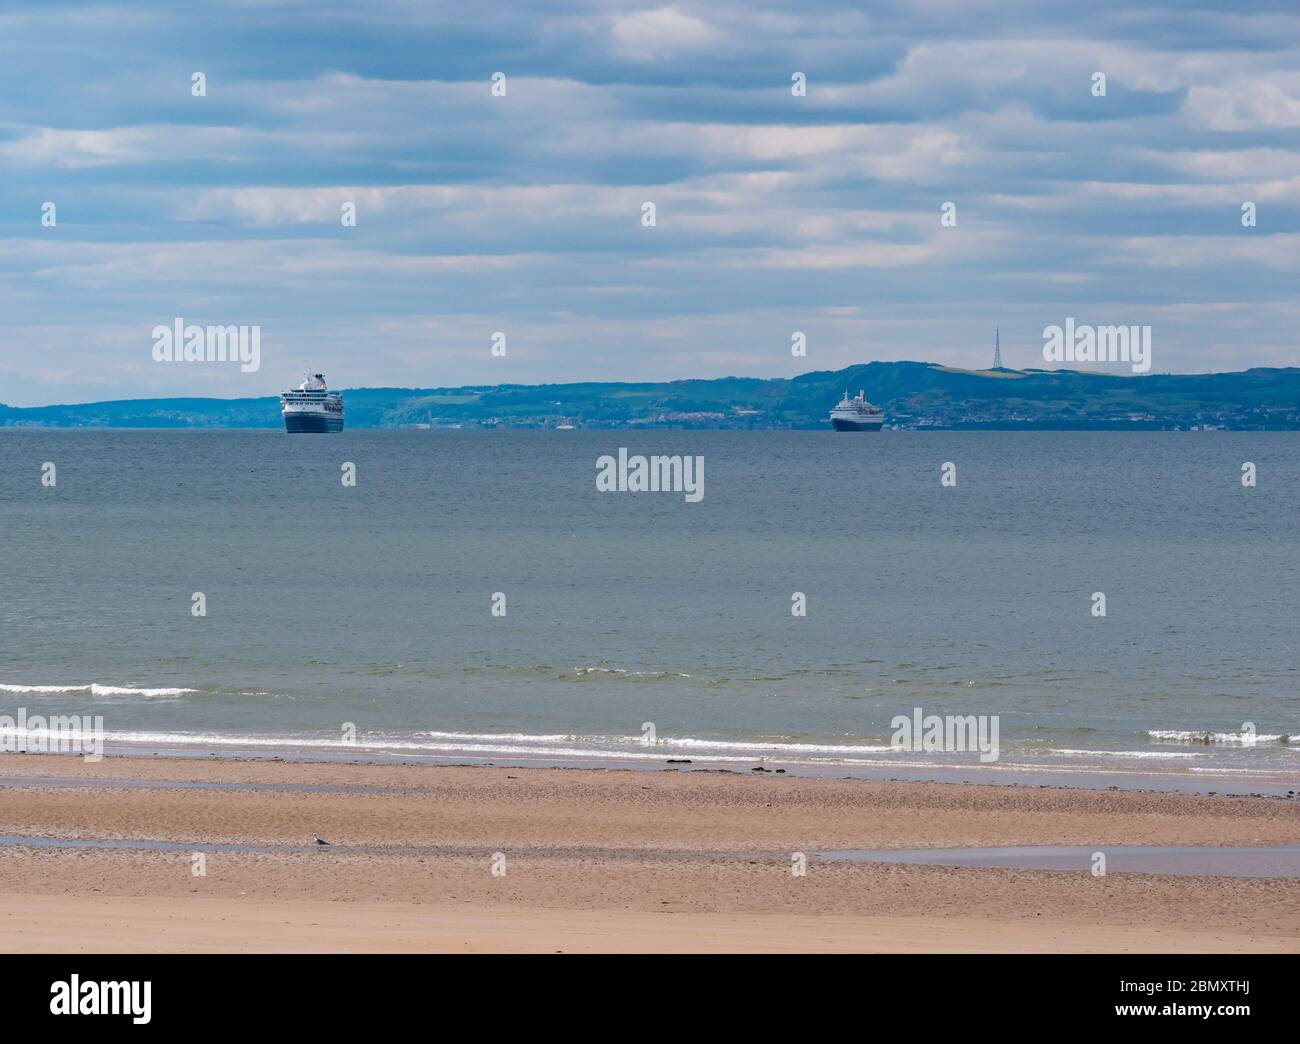 Aberlady nature reserve, East Lothian, Scotland, United Kingdom. 11th May, 2020. UK Weather: Quiet at the reserve during the Covid-19 lockdown with a deserted beach and Fred Olsen mothballed out of service cruise ships anchored in the Firth of Forth Stock Photo